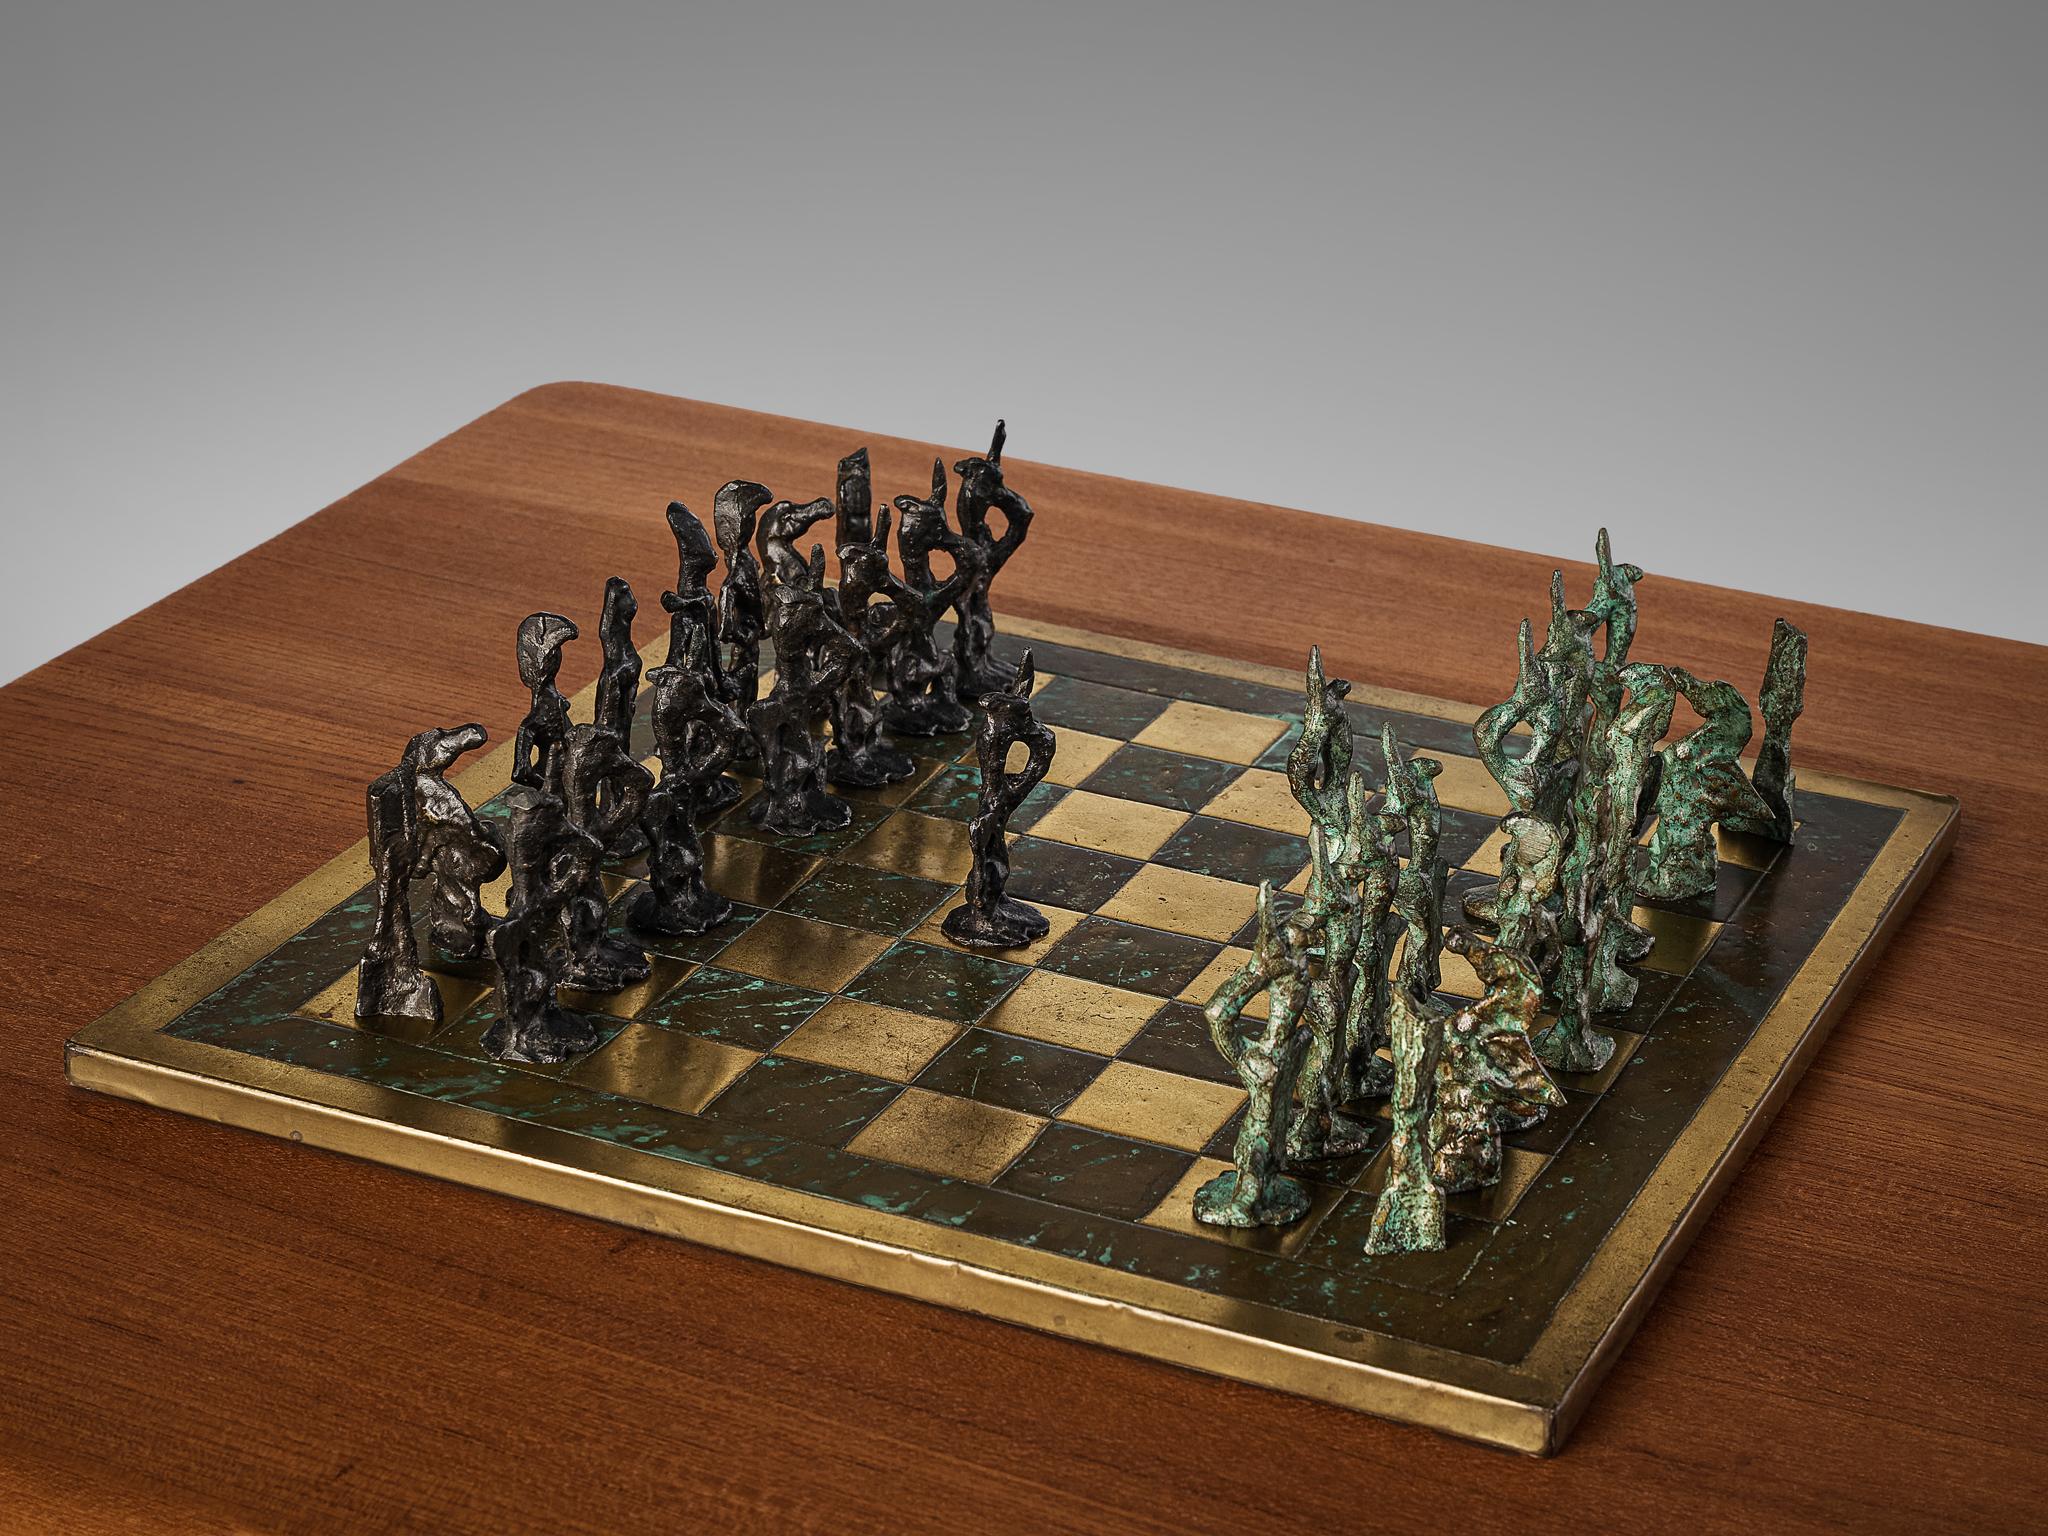 Chess set, brass, bronze, Italy, 1960s

Wonderful, modernist chess set made in the style of Italian artist Alberto Giacometti. The exceptional game of chess has a stunning look. Each piece is casted in bronze making it solid. Therefore, they are